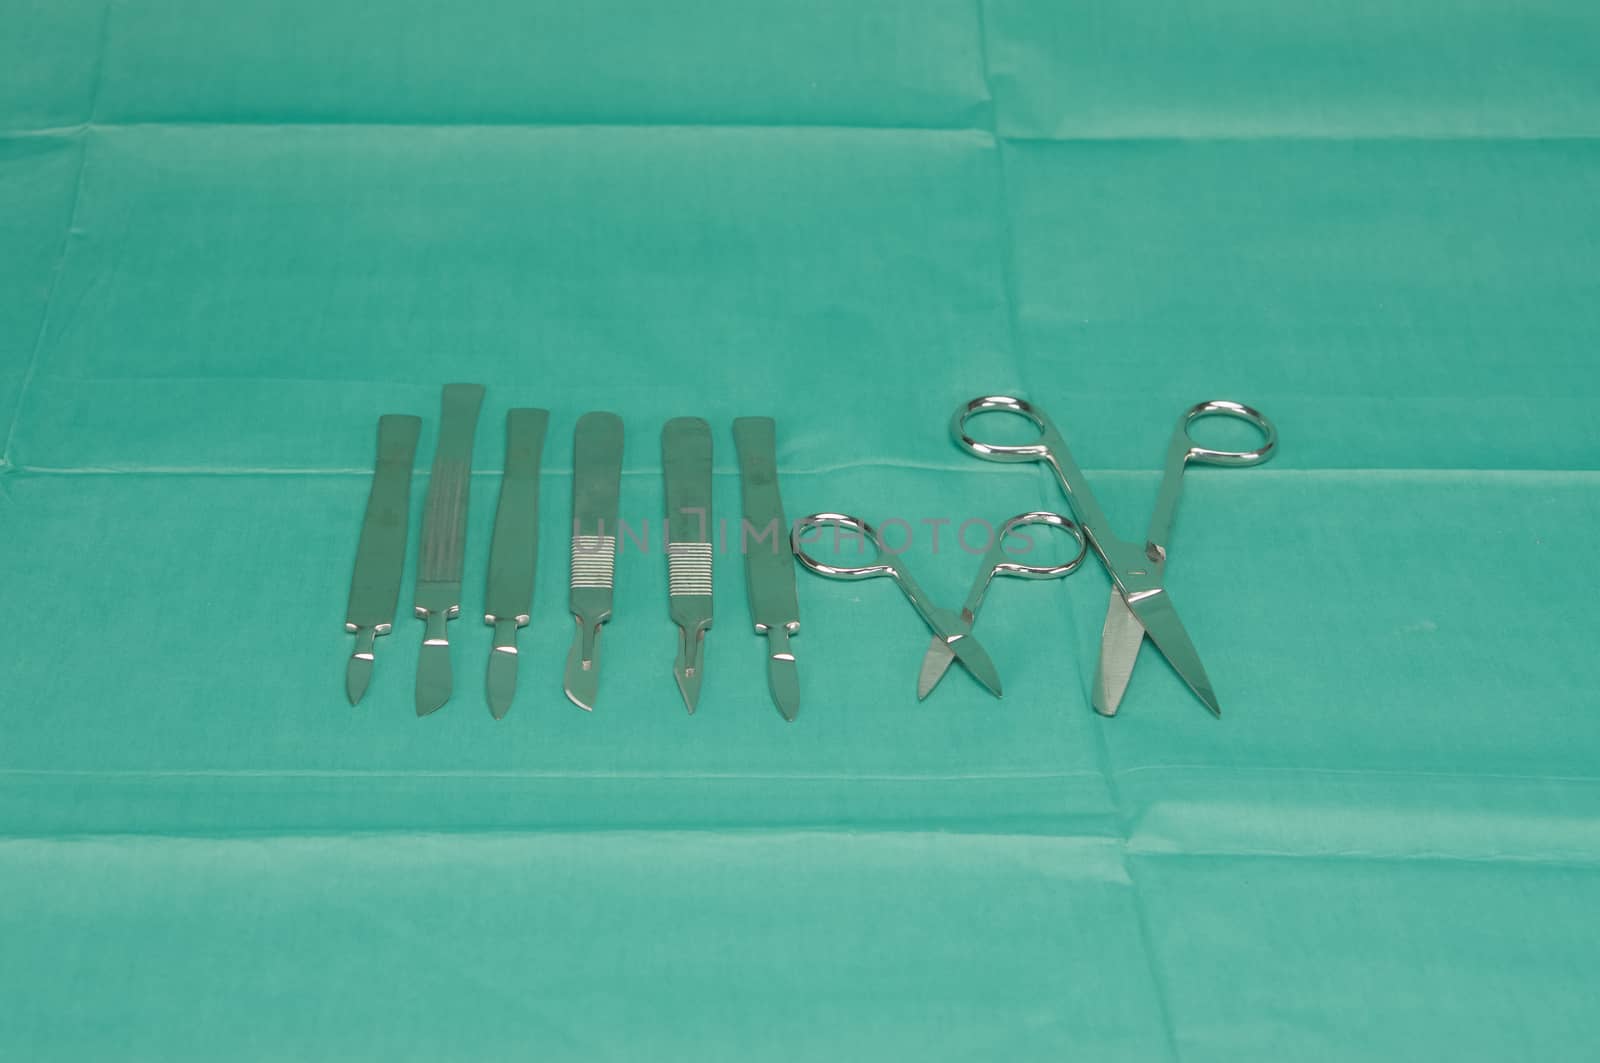 Stainless scalpel and scissors on green fabric by ninun